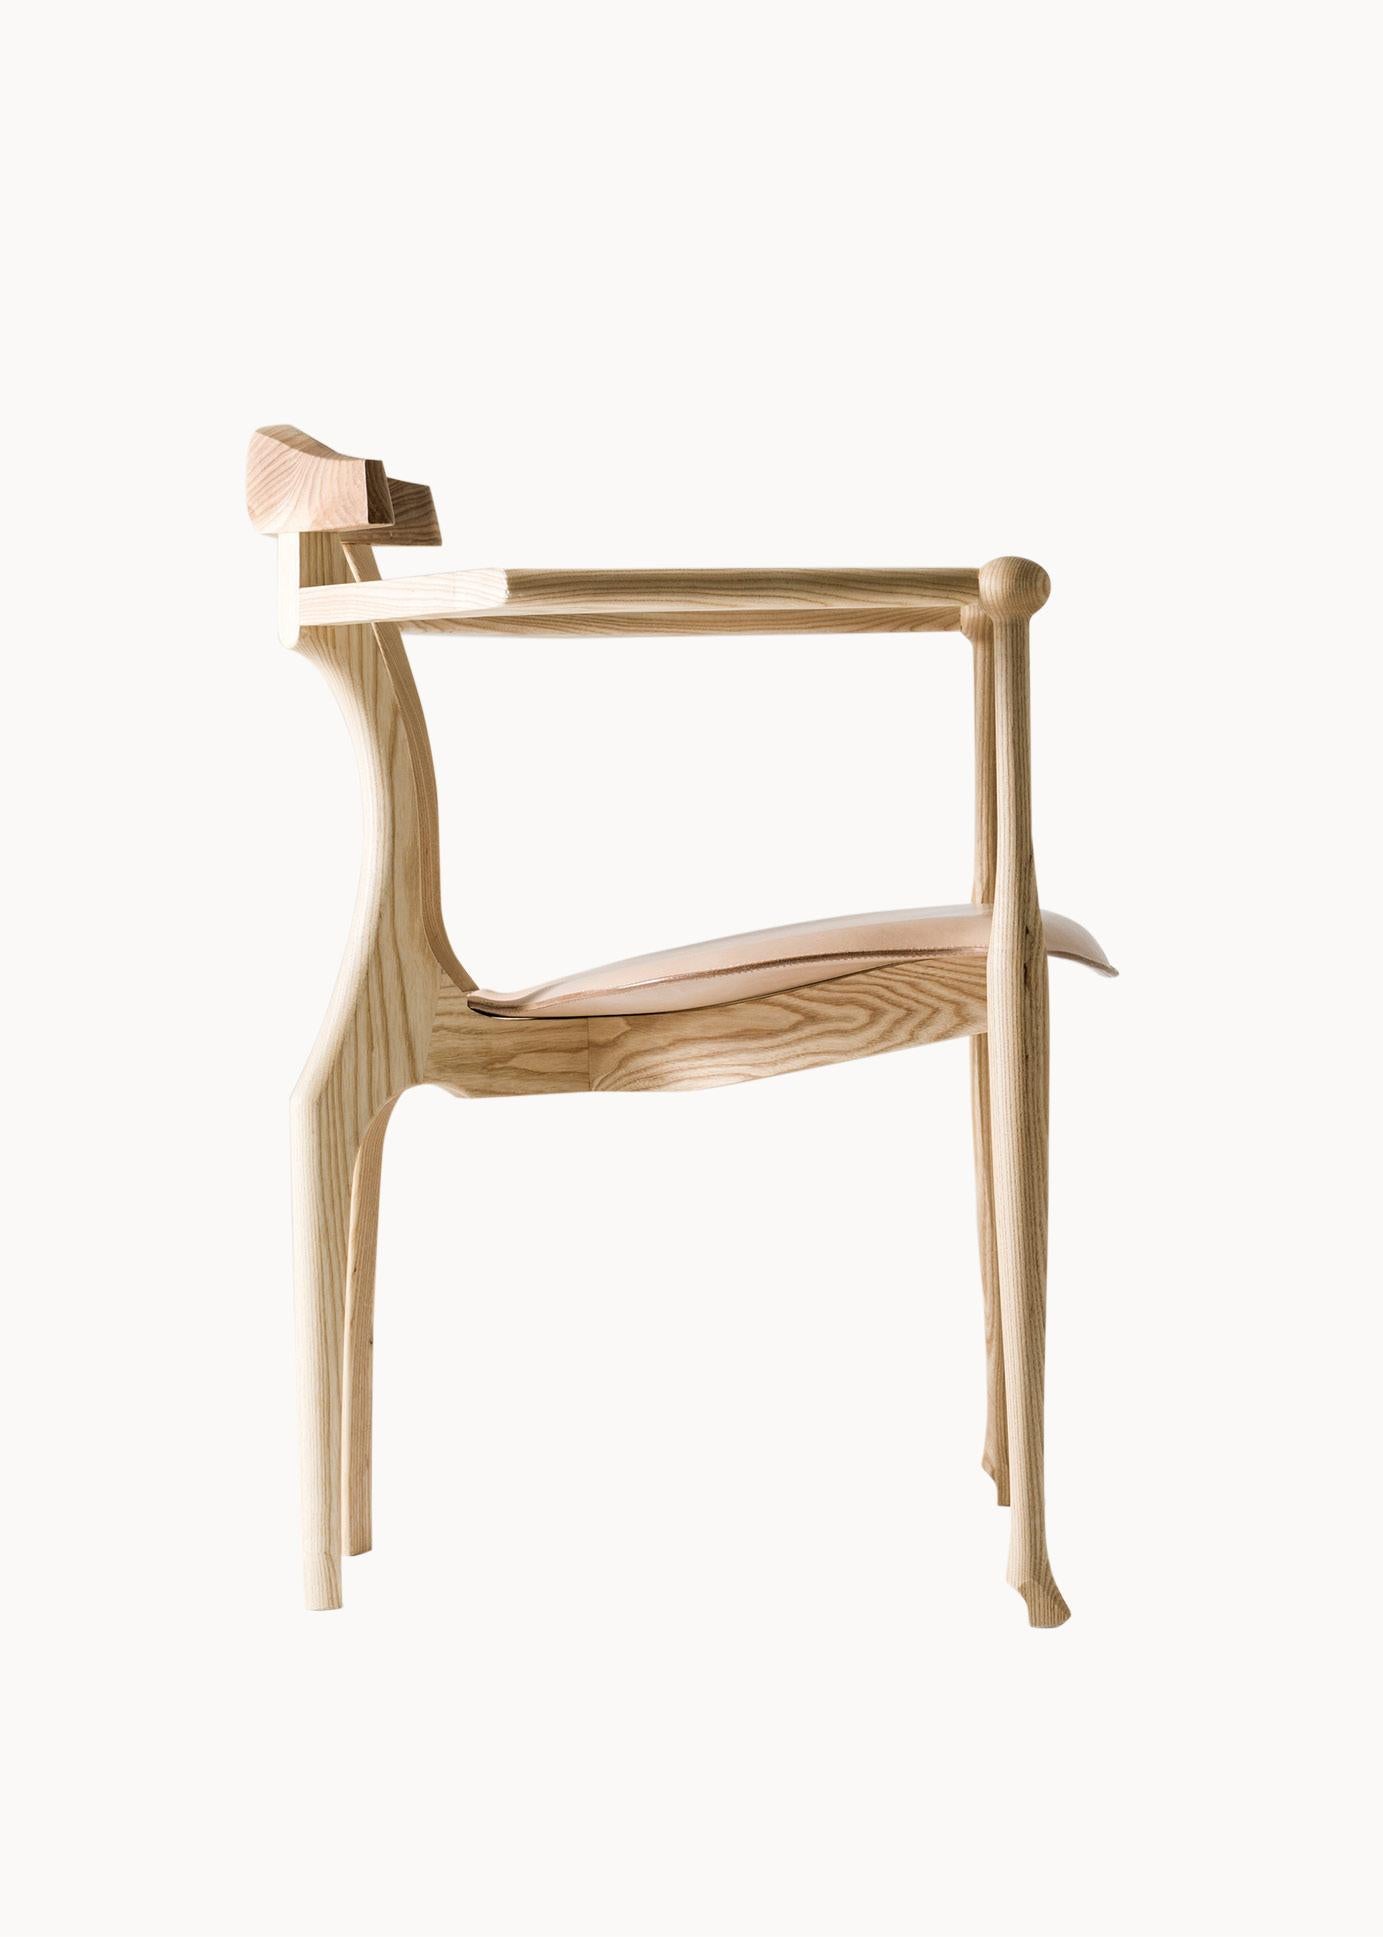 Varnished Gaulino Easy Chair by Oscar Tusquets natural ash wood occasional chair, Spain For Sale